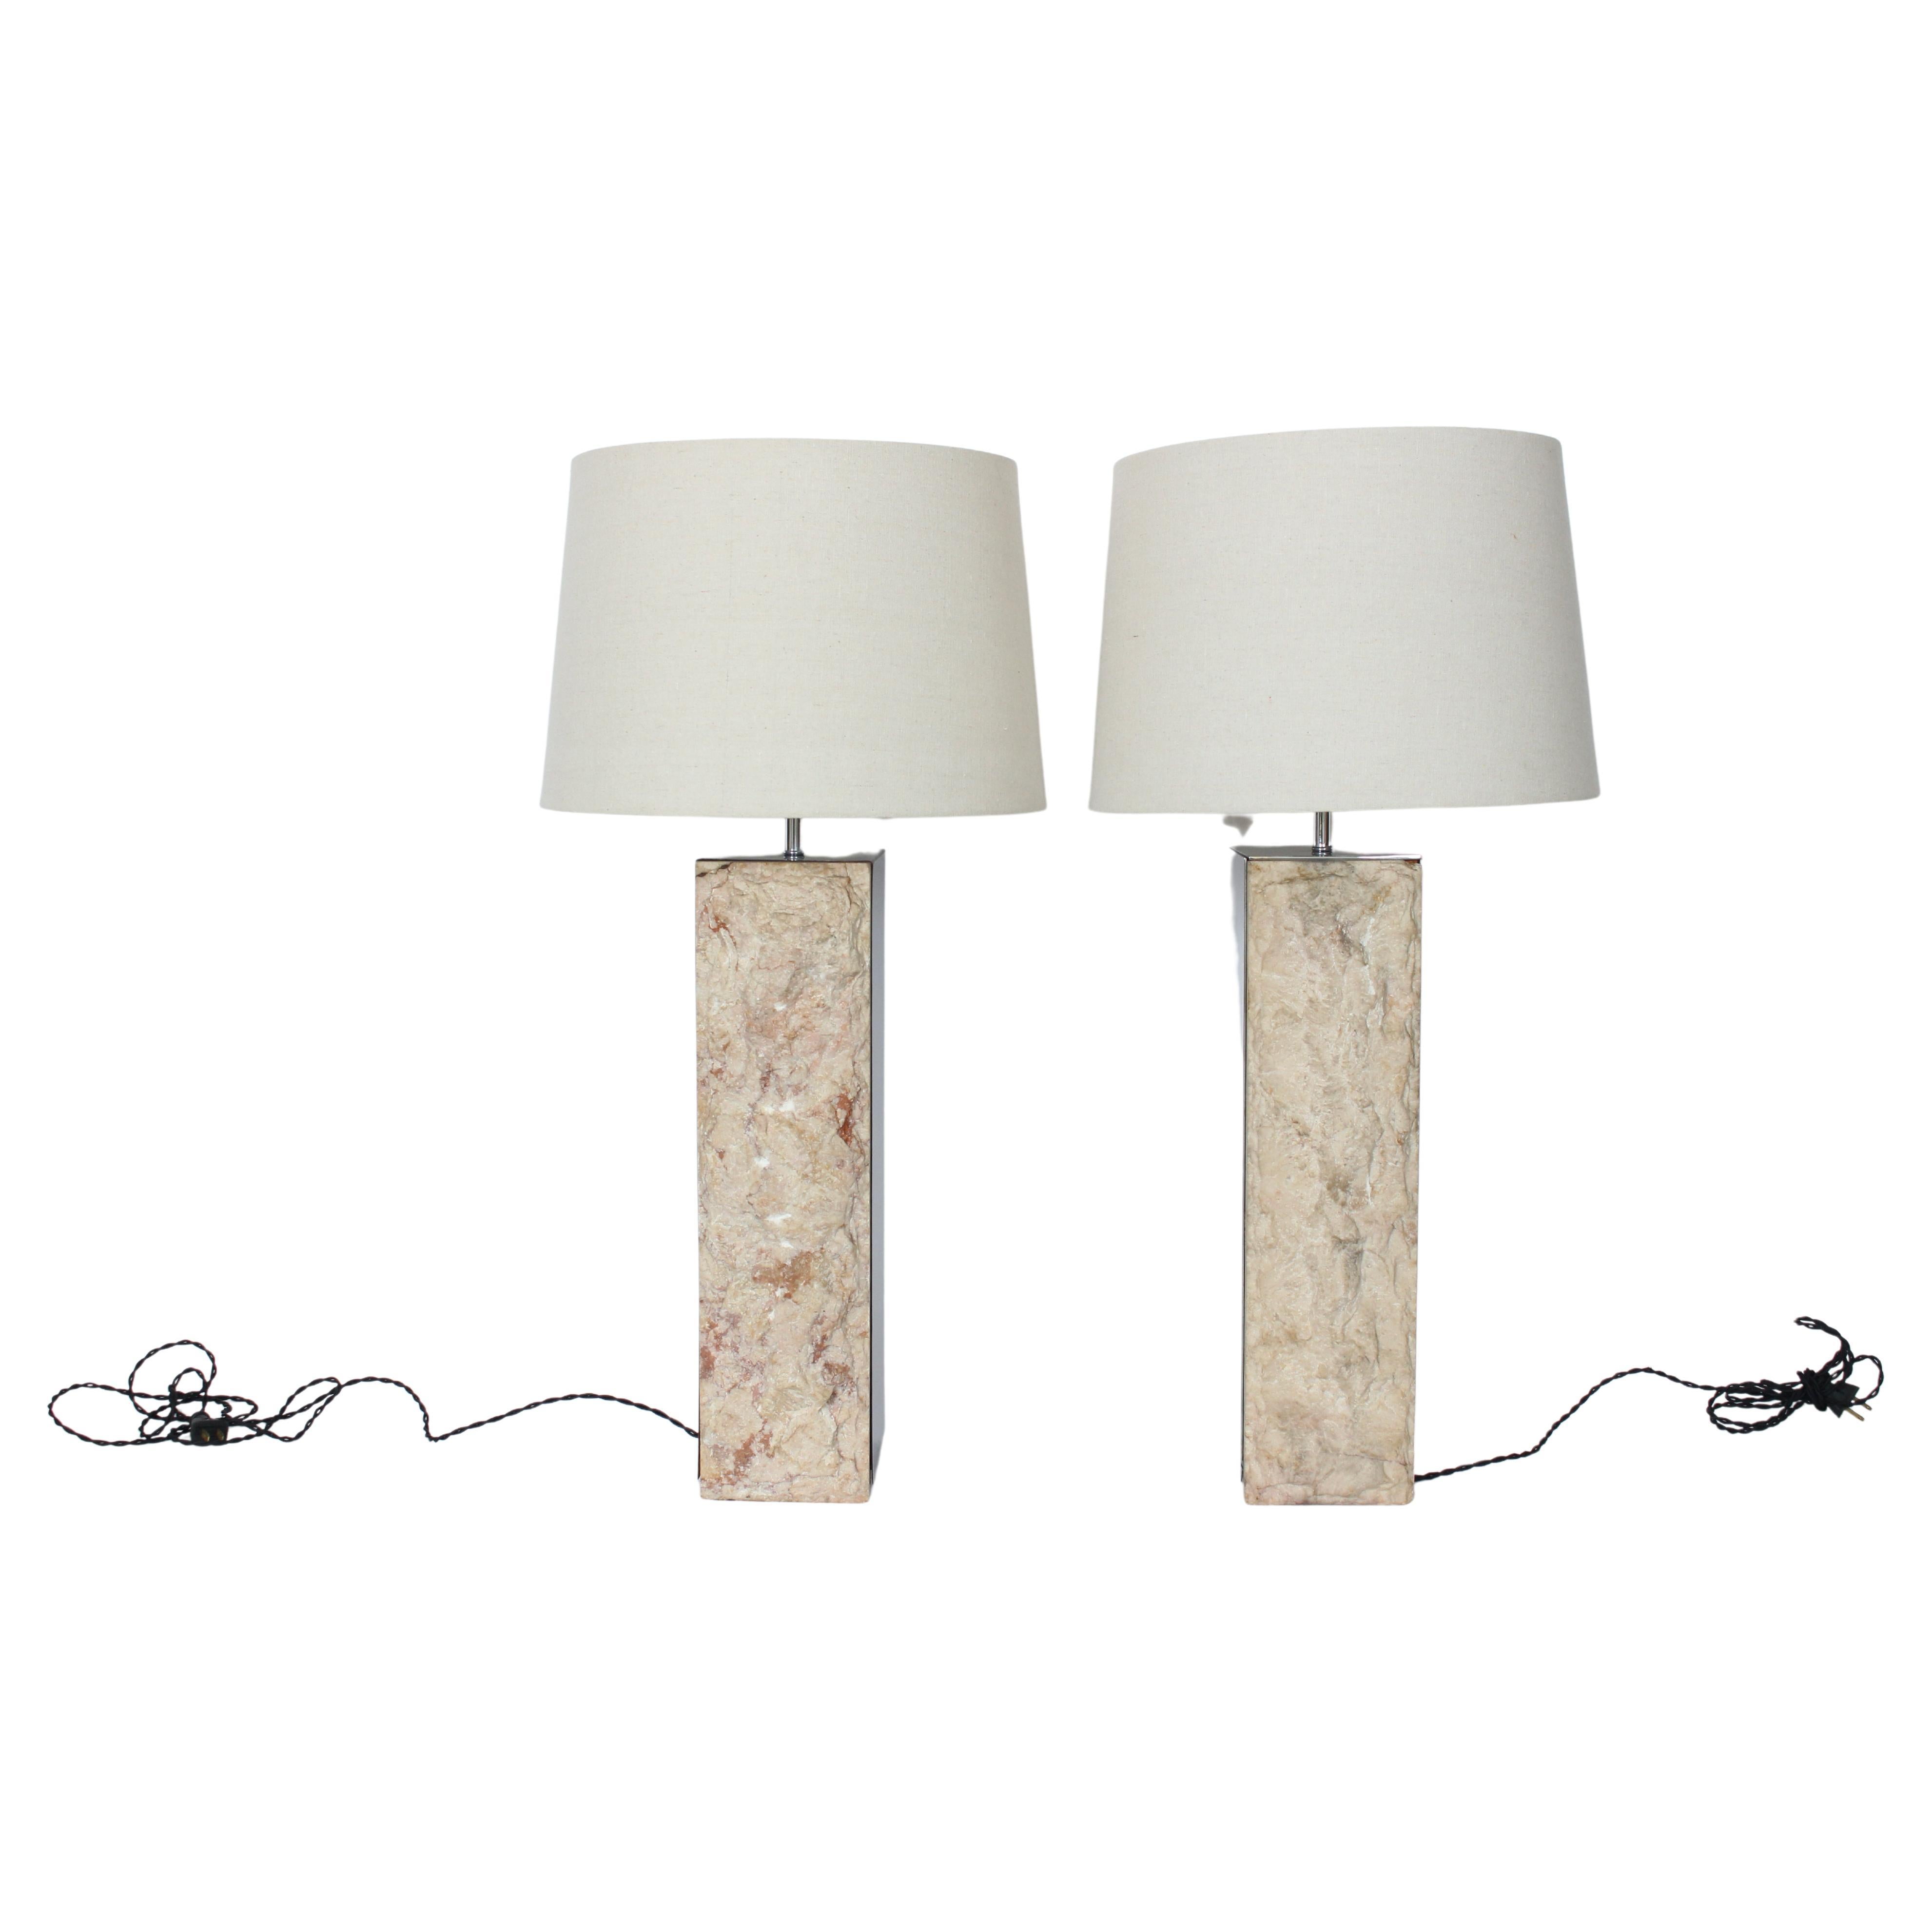 Substantial Pair of Laurel Italian Rough Cut Marble & Polished Metal Table Lamps For Sale